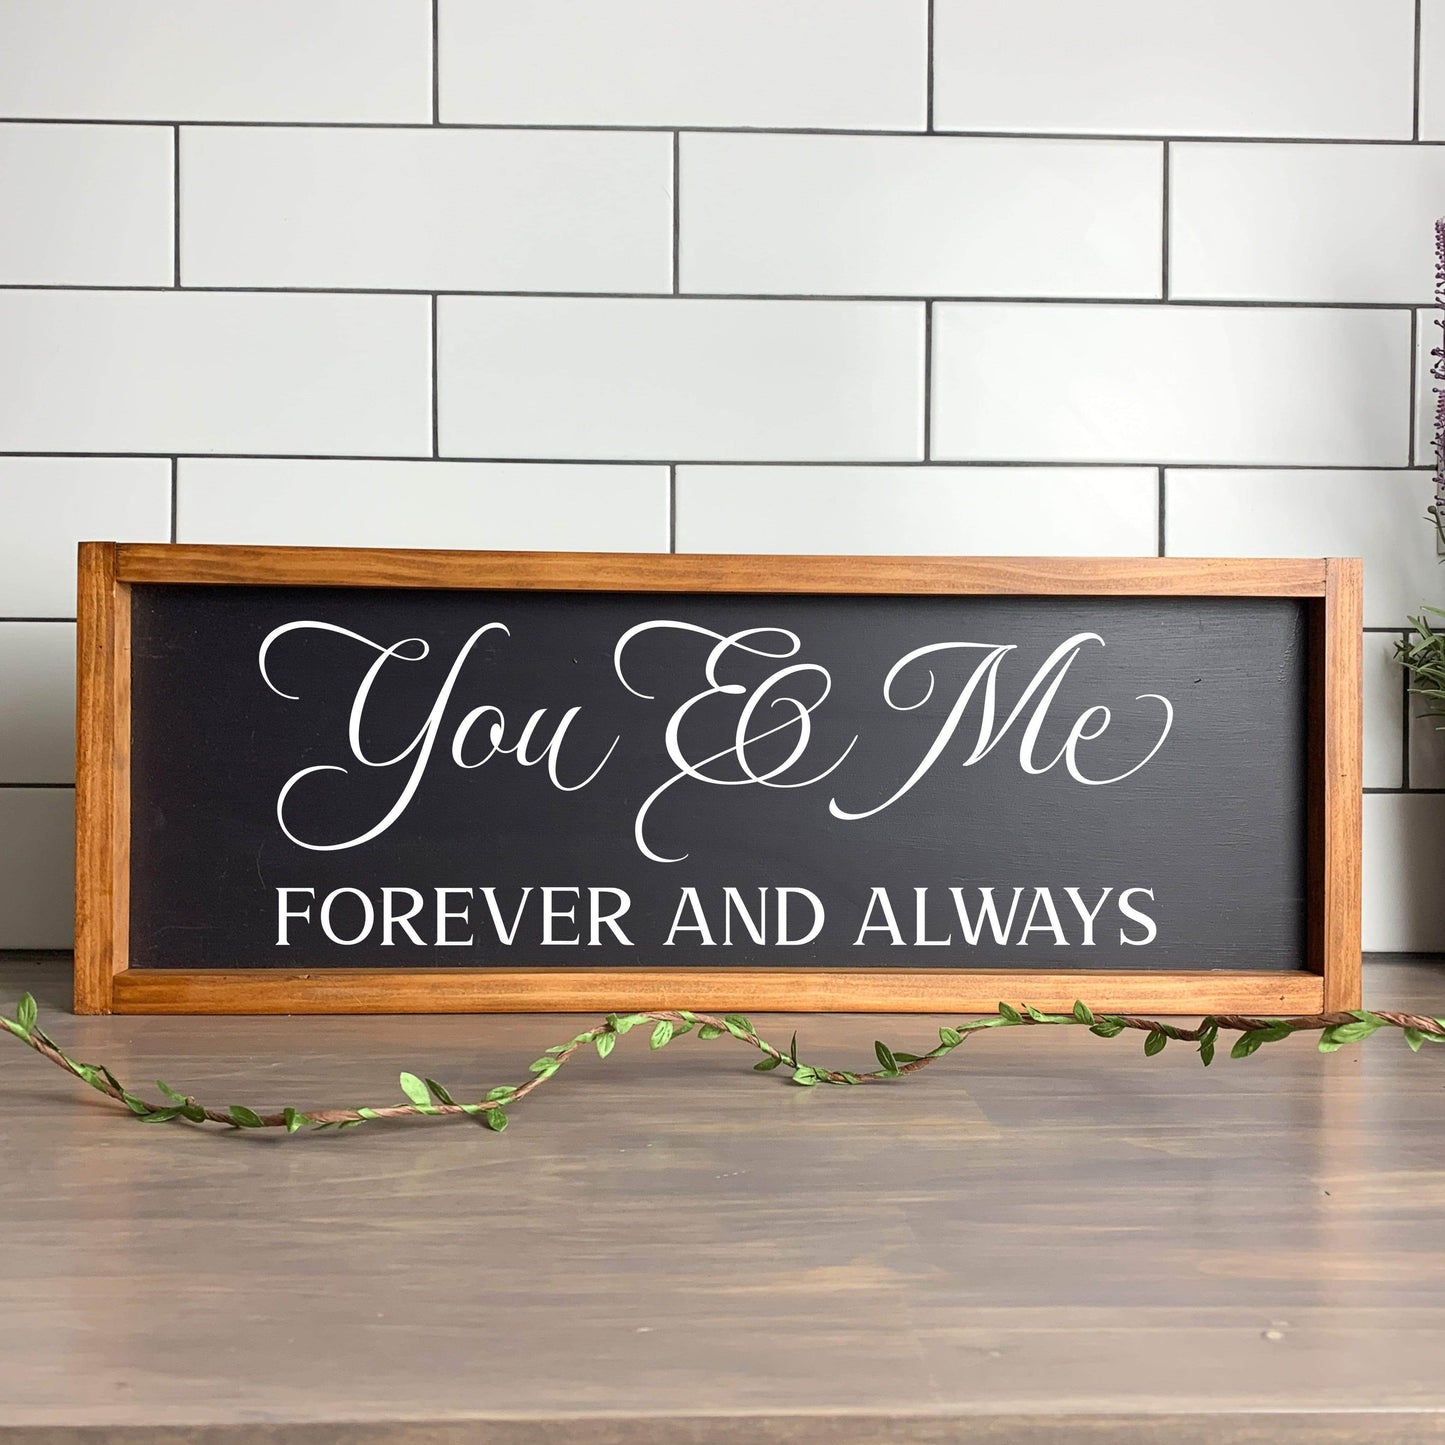 You and Me Forever, Always framed wood sign, love sign, couples gift sign, quote sign, home decor